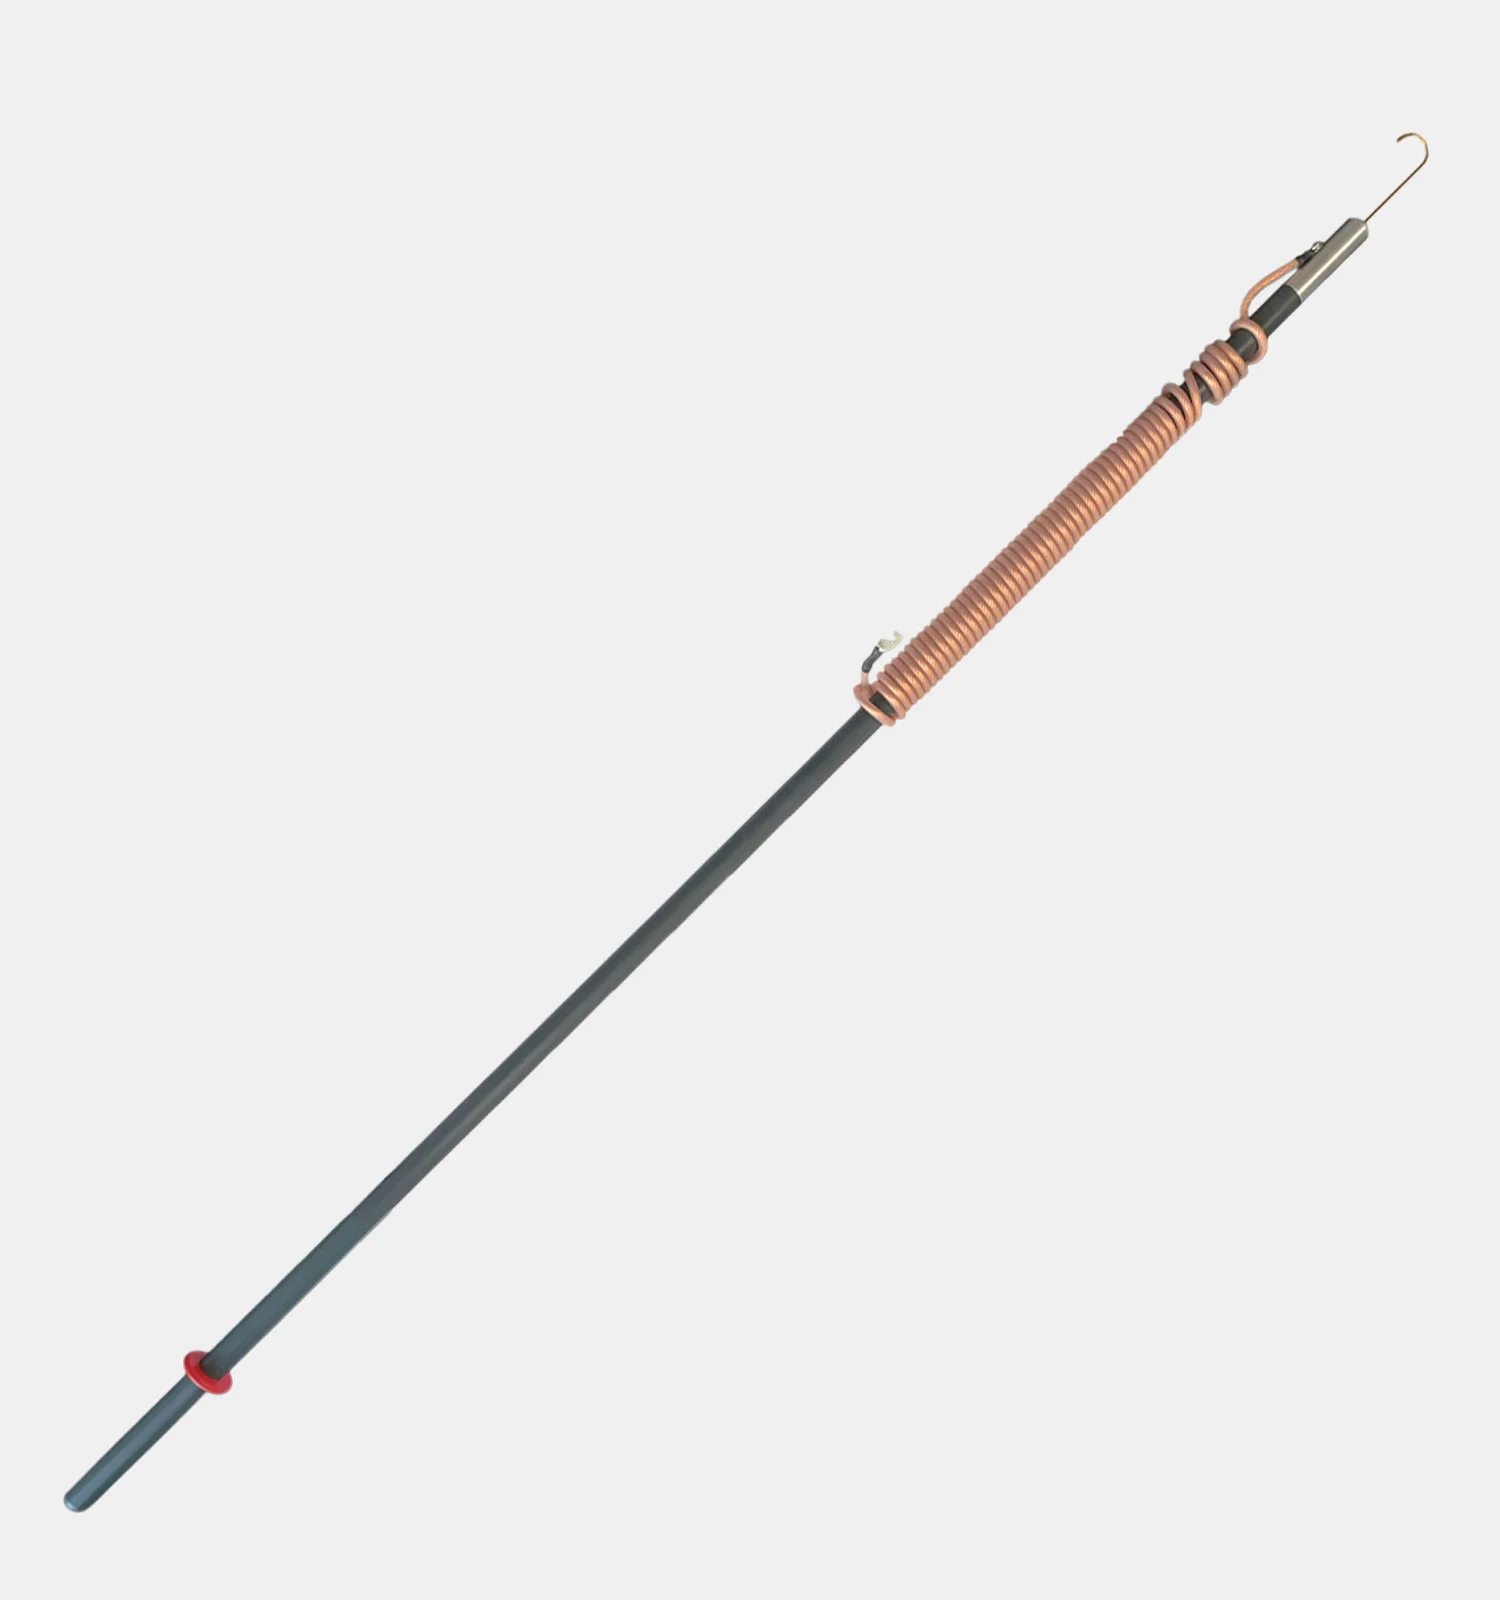 Suppliers of ES100 Earthing Stick